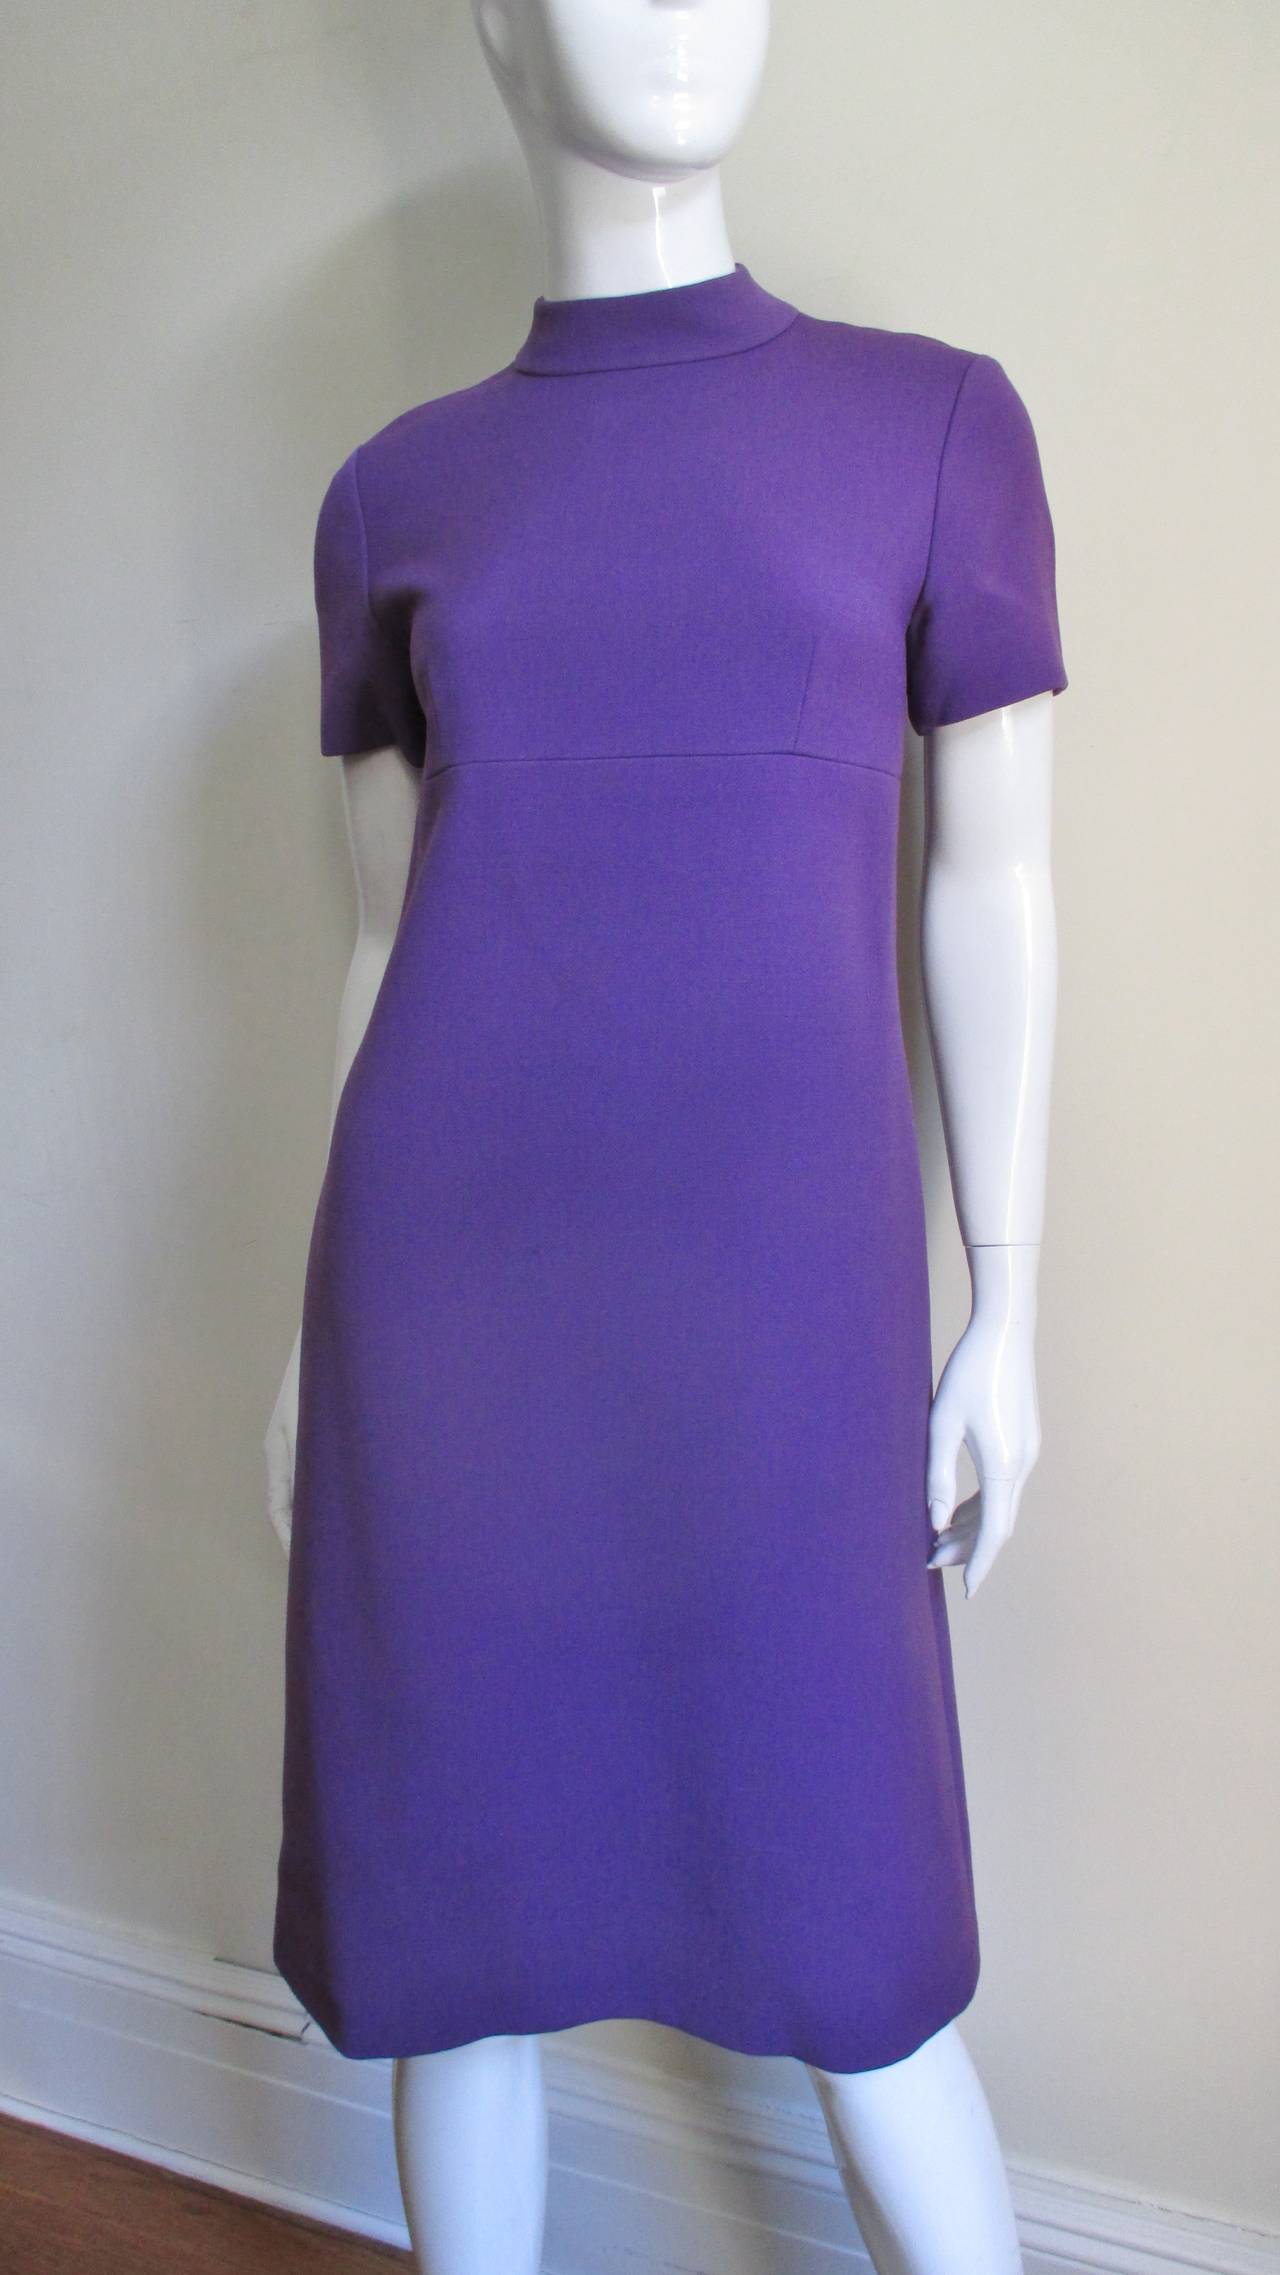 An amazing purple wool dress and coat set from Yves St Laurent YSL for Christian Dior.  The dress is a simple short sleeved shift with a stand up collar, and a back hand stitched zipper.  The double breasted coat has 4 matching buttons and bound